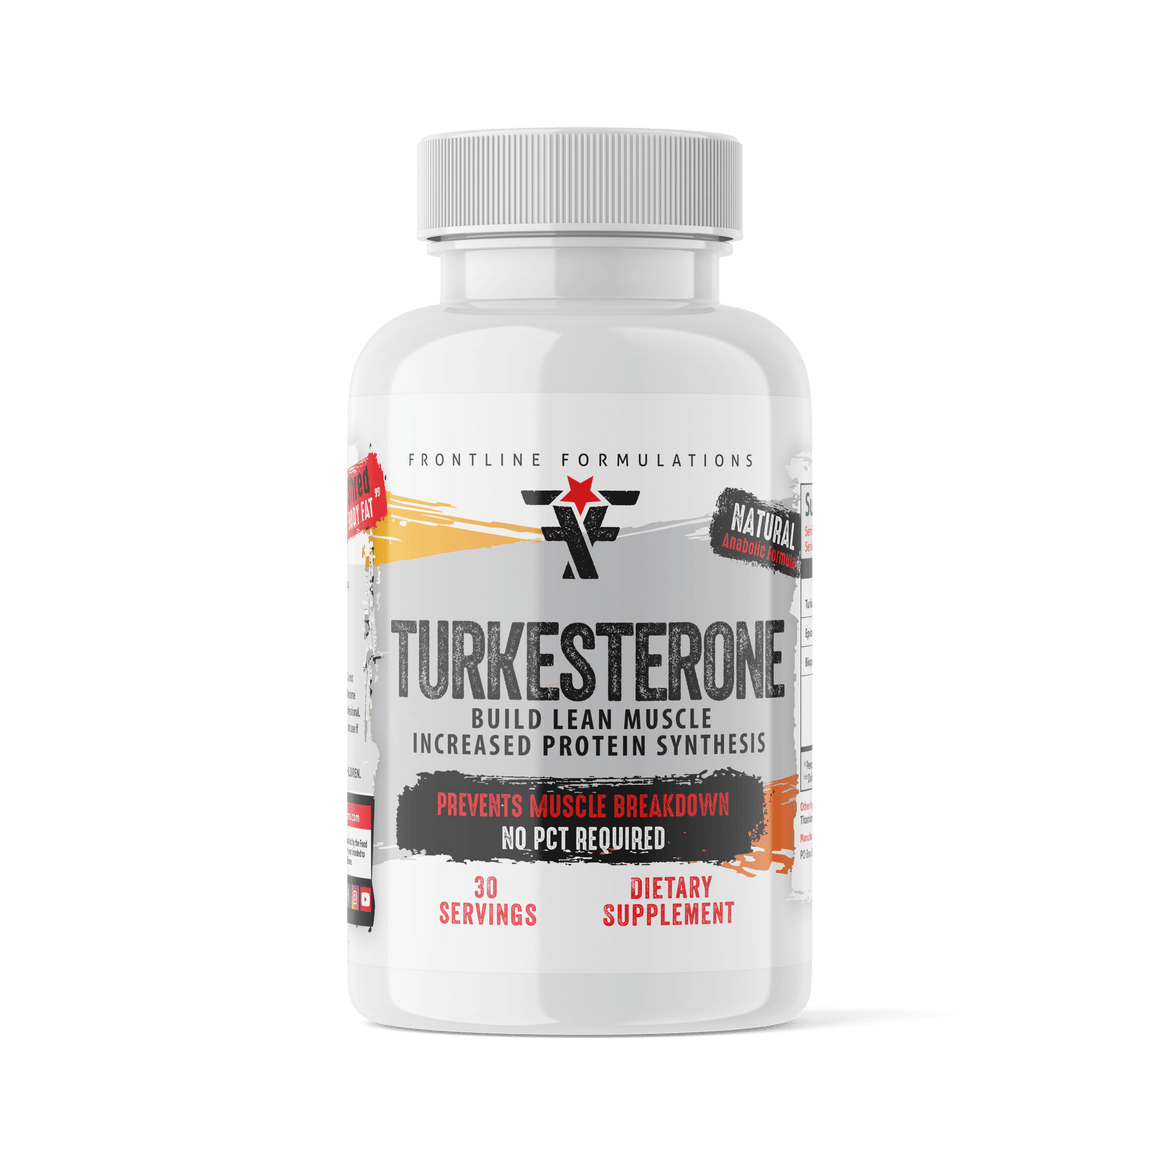 Frontline Formulations Turkesterone The latest and greatest NATURAL muscle building, fat burning compound to hit the market. Use this to boost the body's metabolism of protein consumption and expect to build lean muscle, exercise performance to increase a